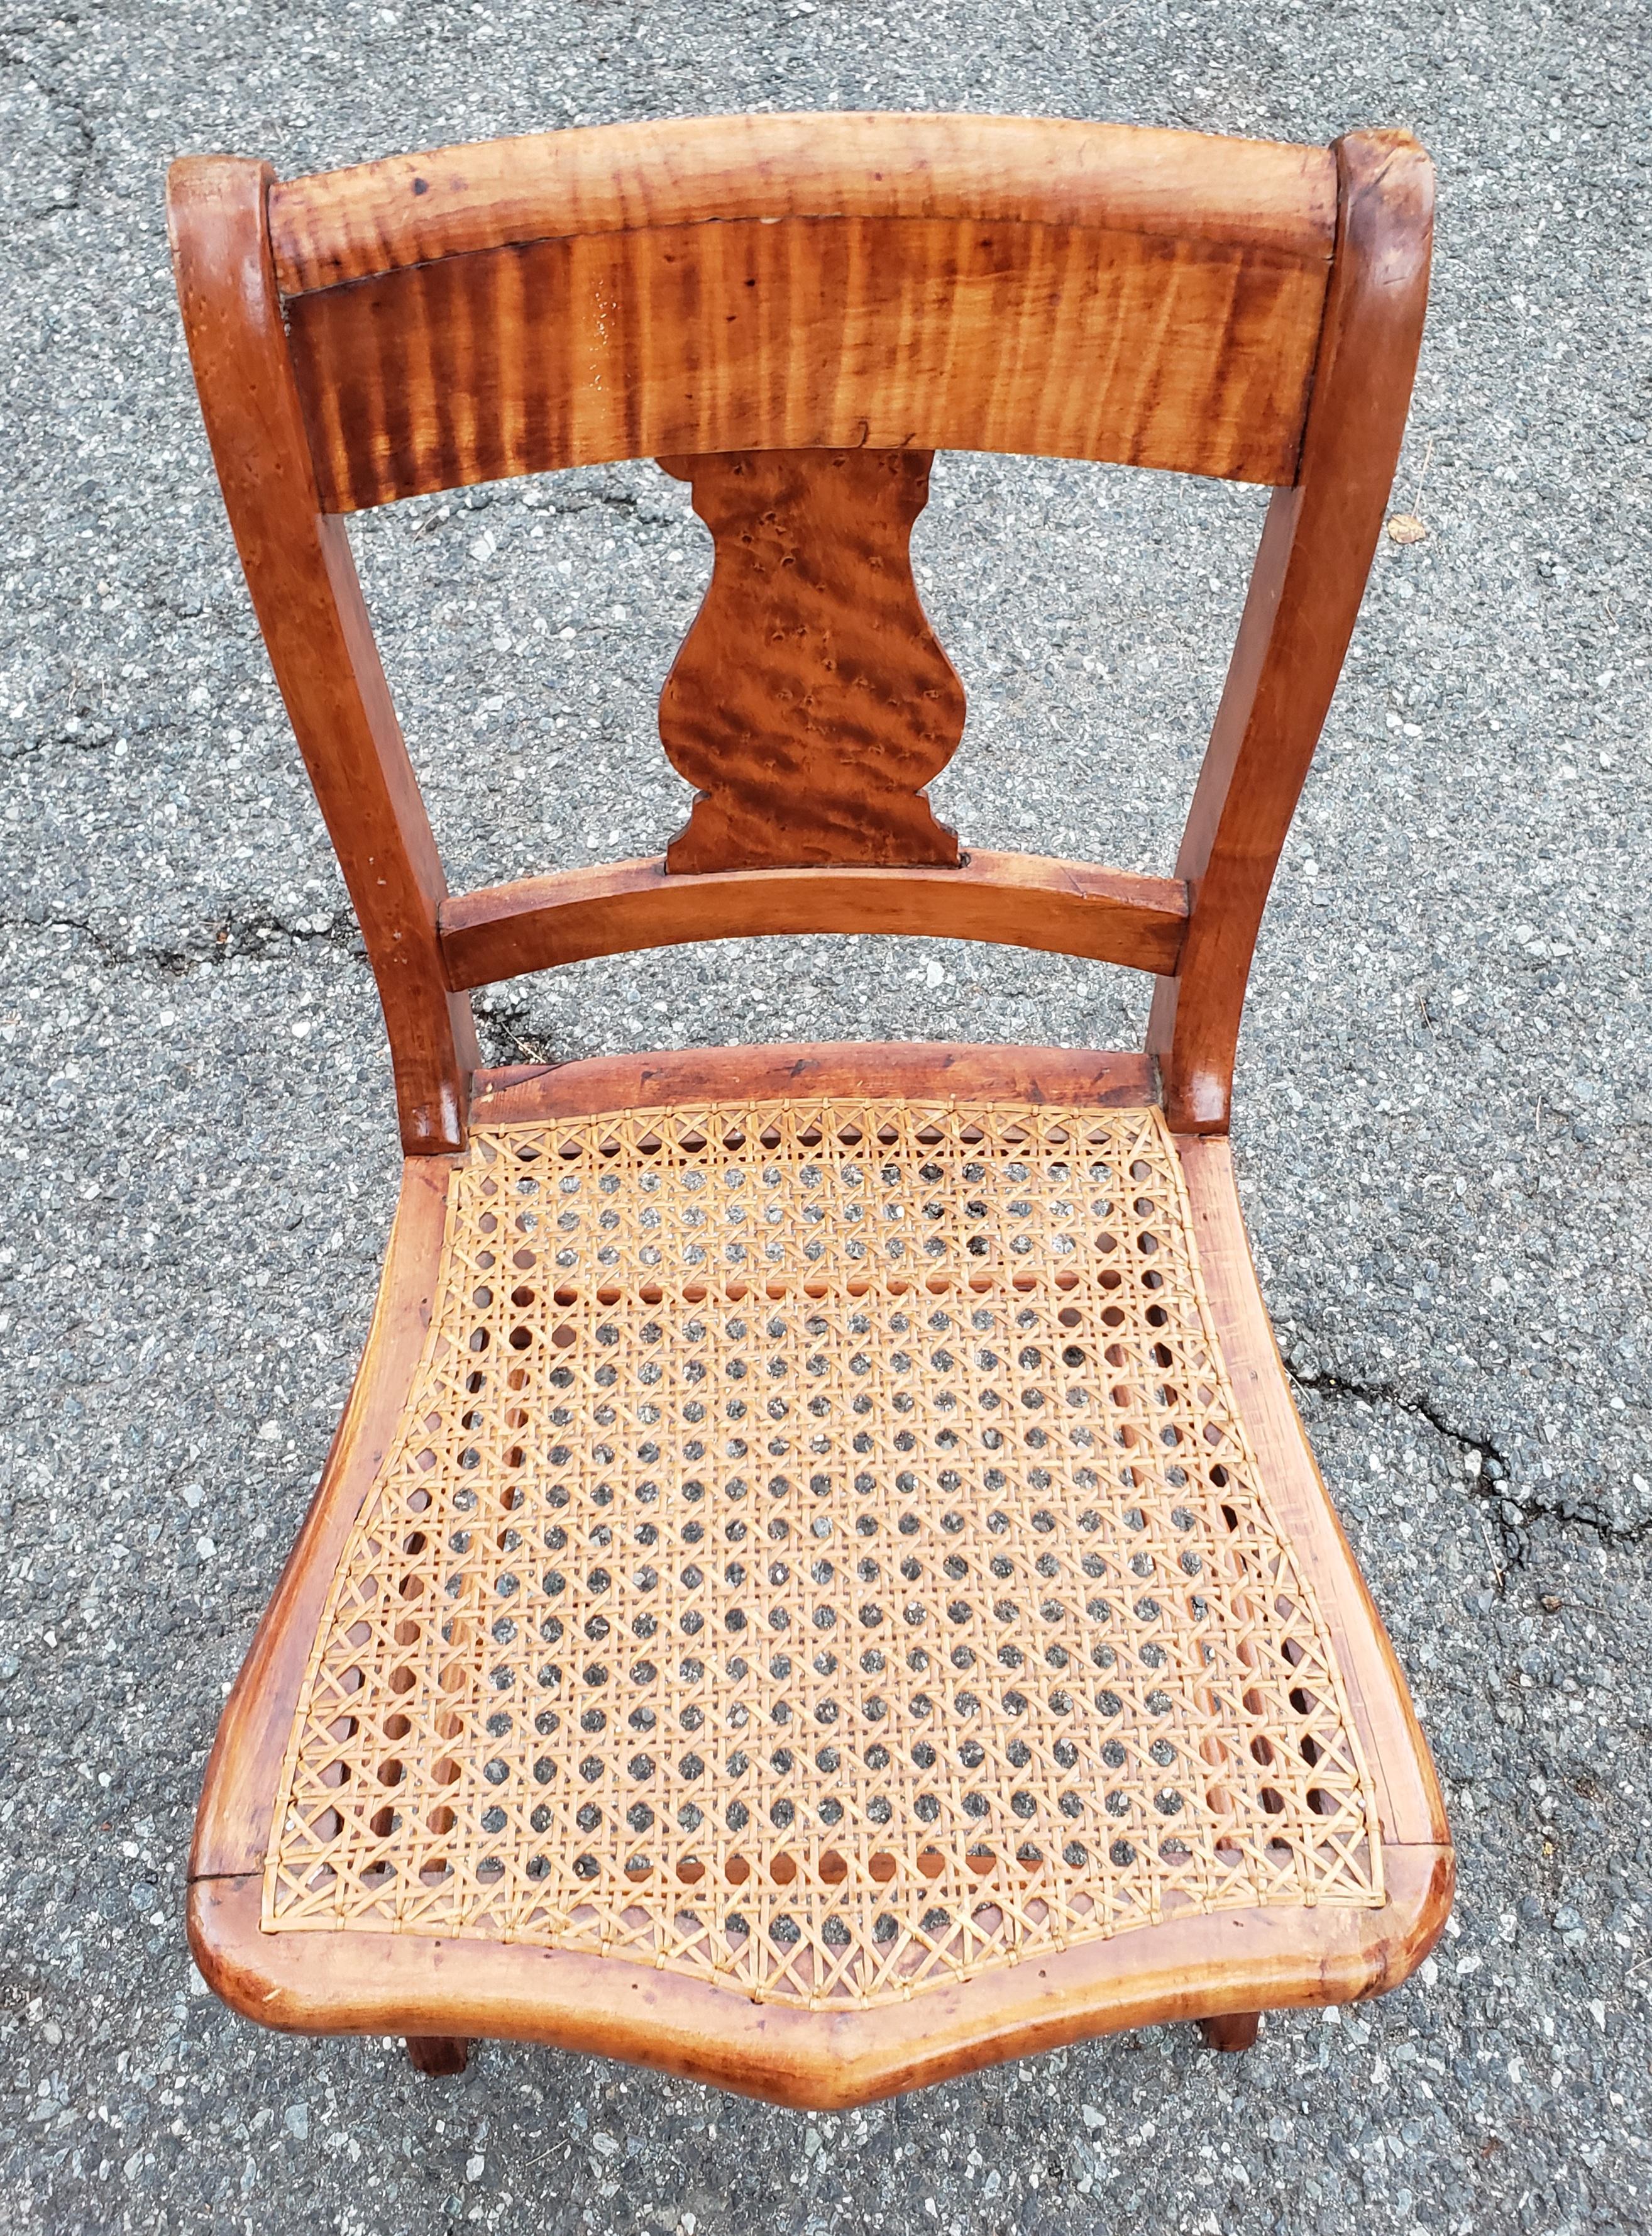 A pair of early 20th century Victorian tiger maple side chairs.
Chairs were Recaned down the road. 